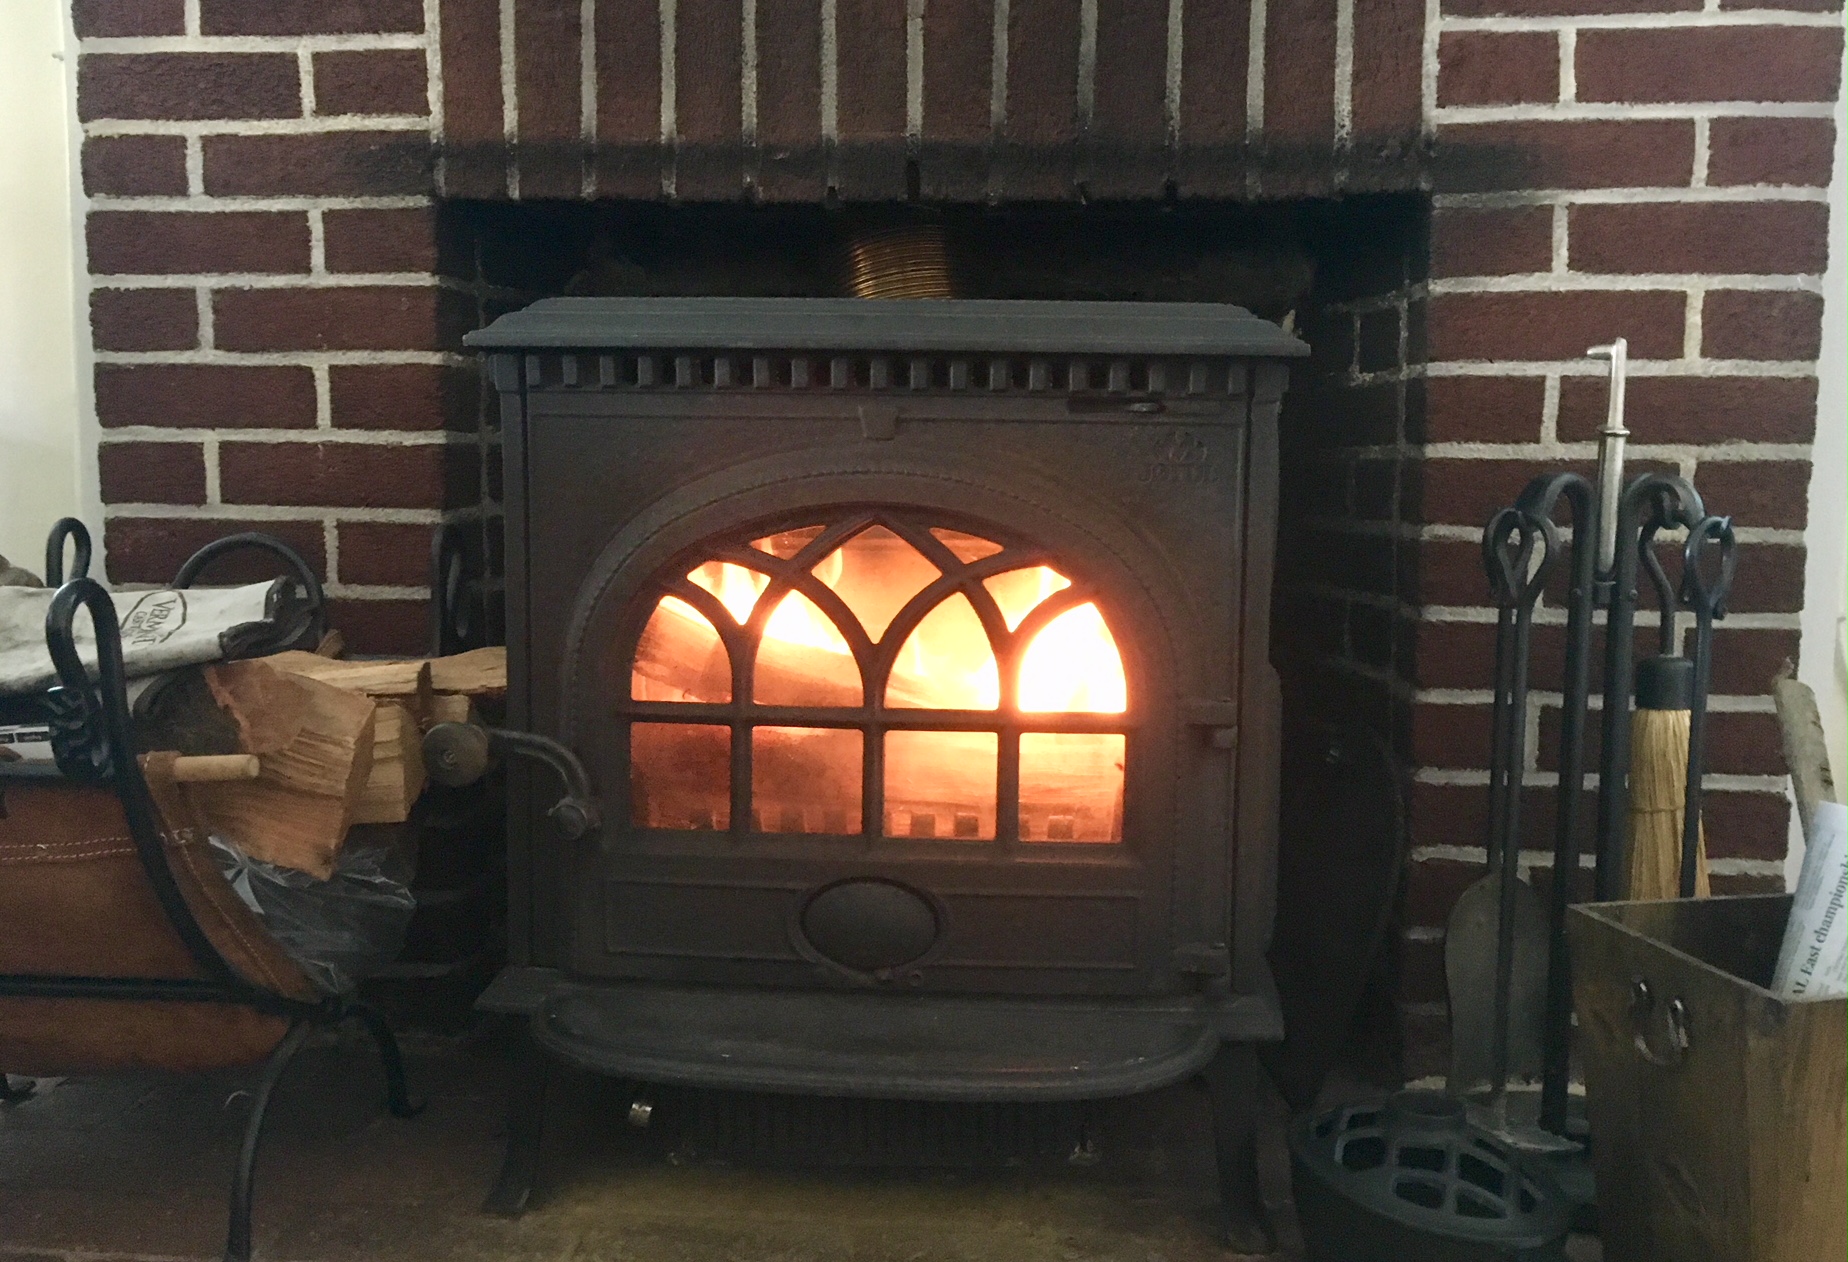 Replacement Fire Brick - Tiny Wood Stove